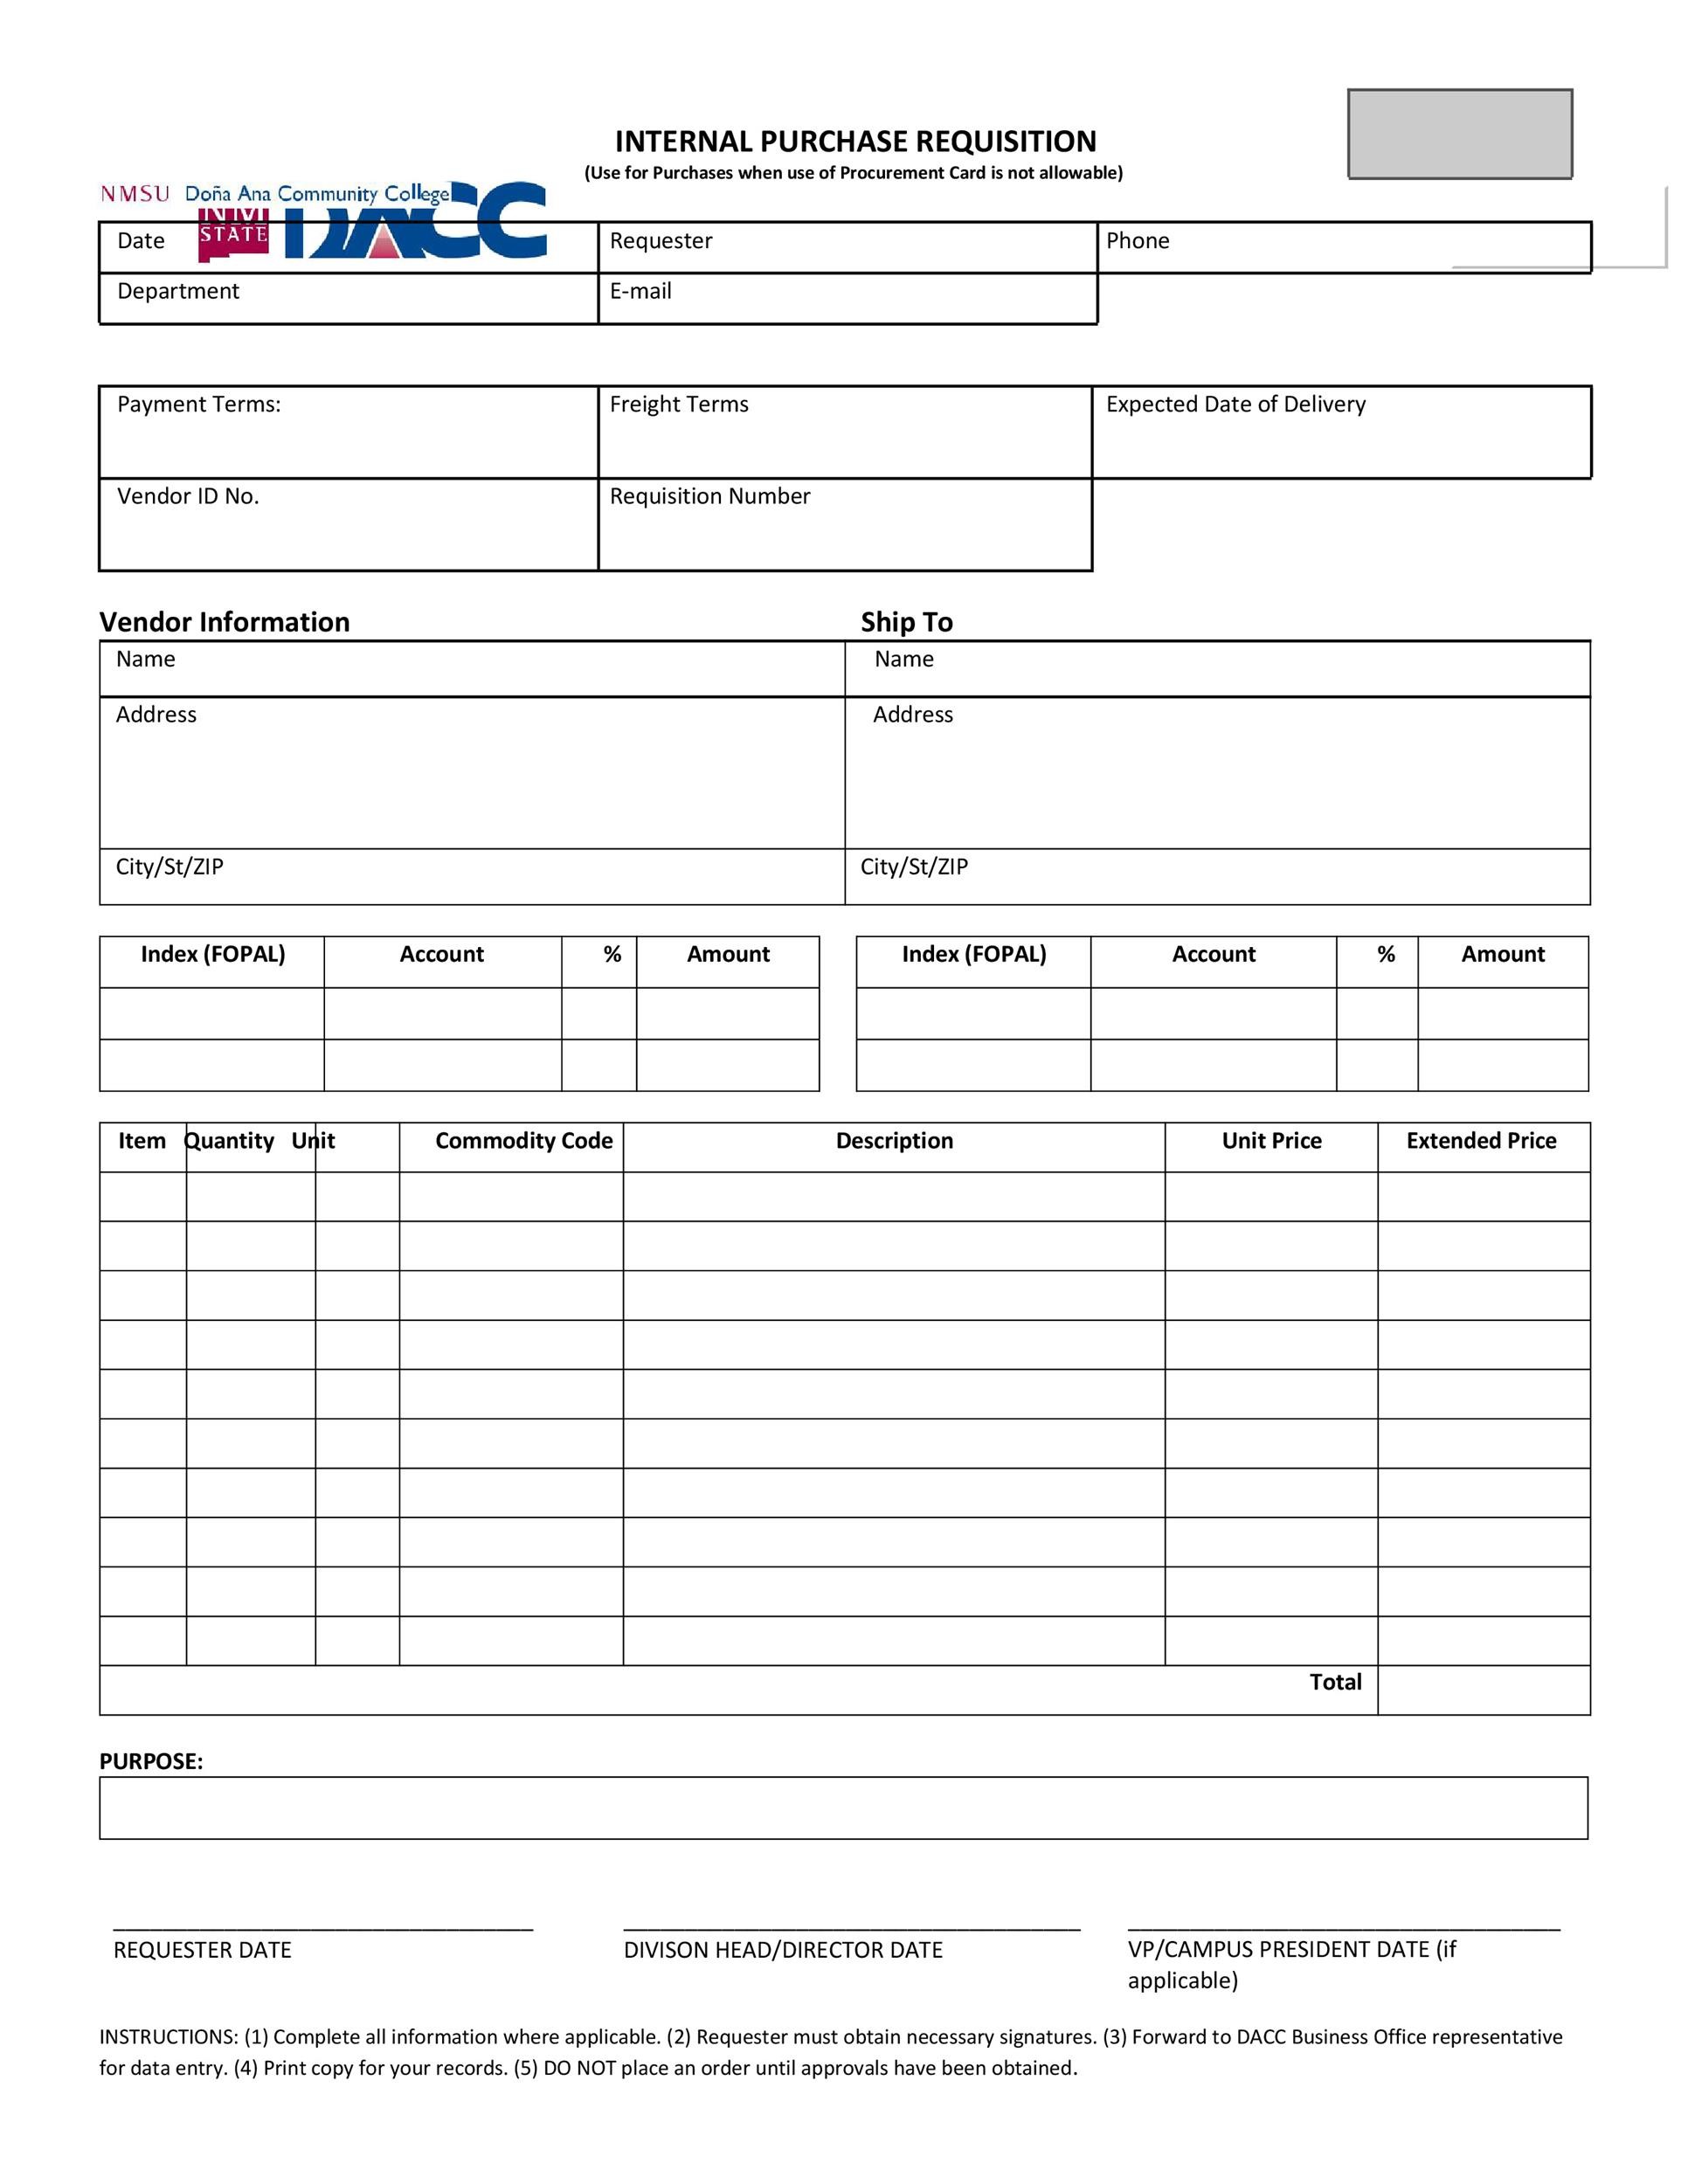 Free requisition form 21